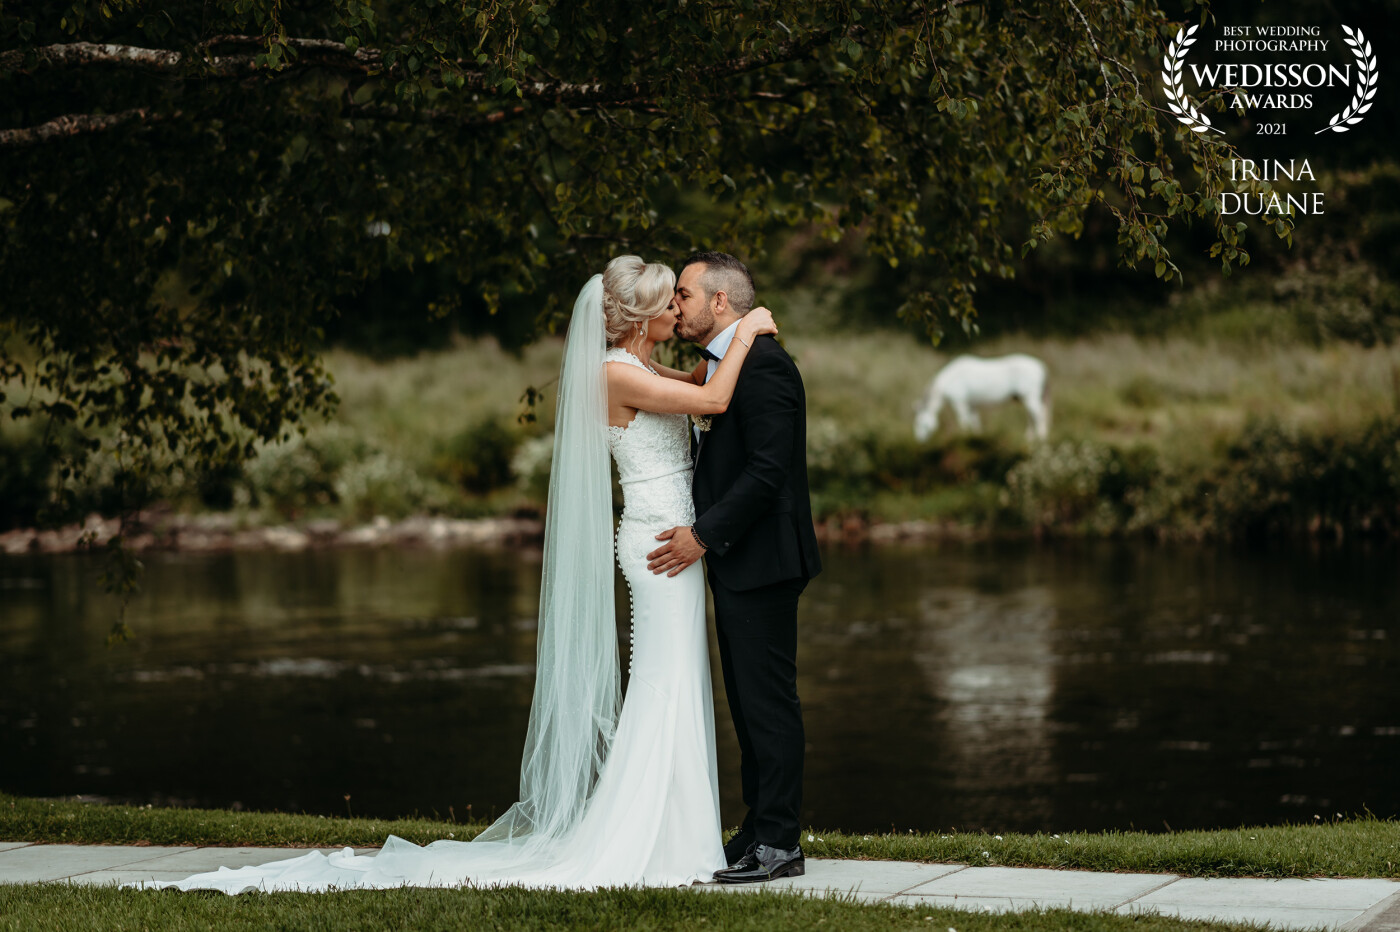 Everything came together: a great couple, amazing weather, and a location with a unicorn in the background. Inistioge in County Kilkenny is a perfect backdrop for weddings.  